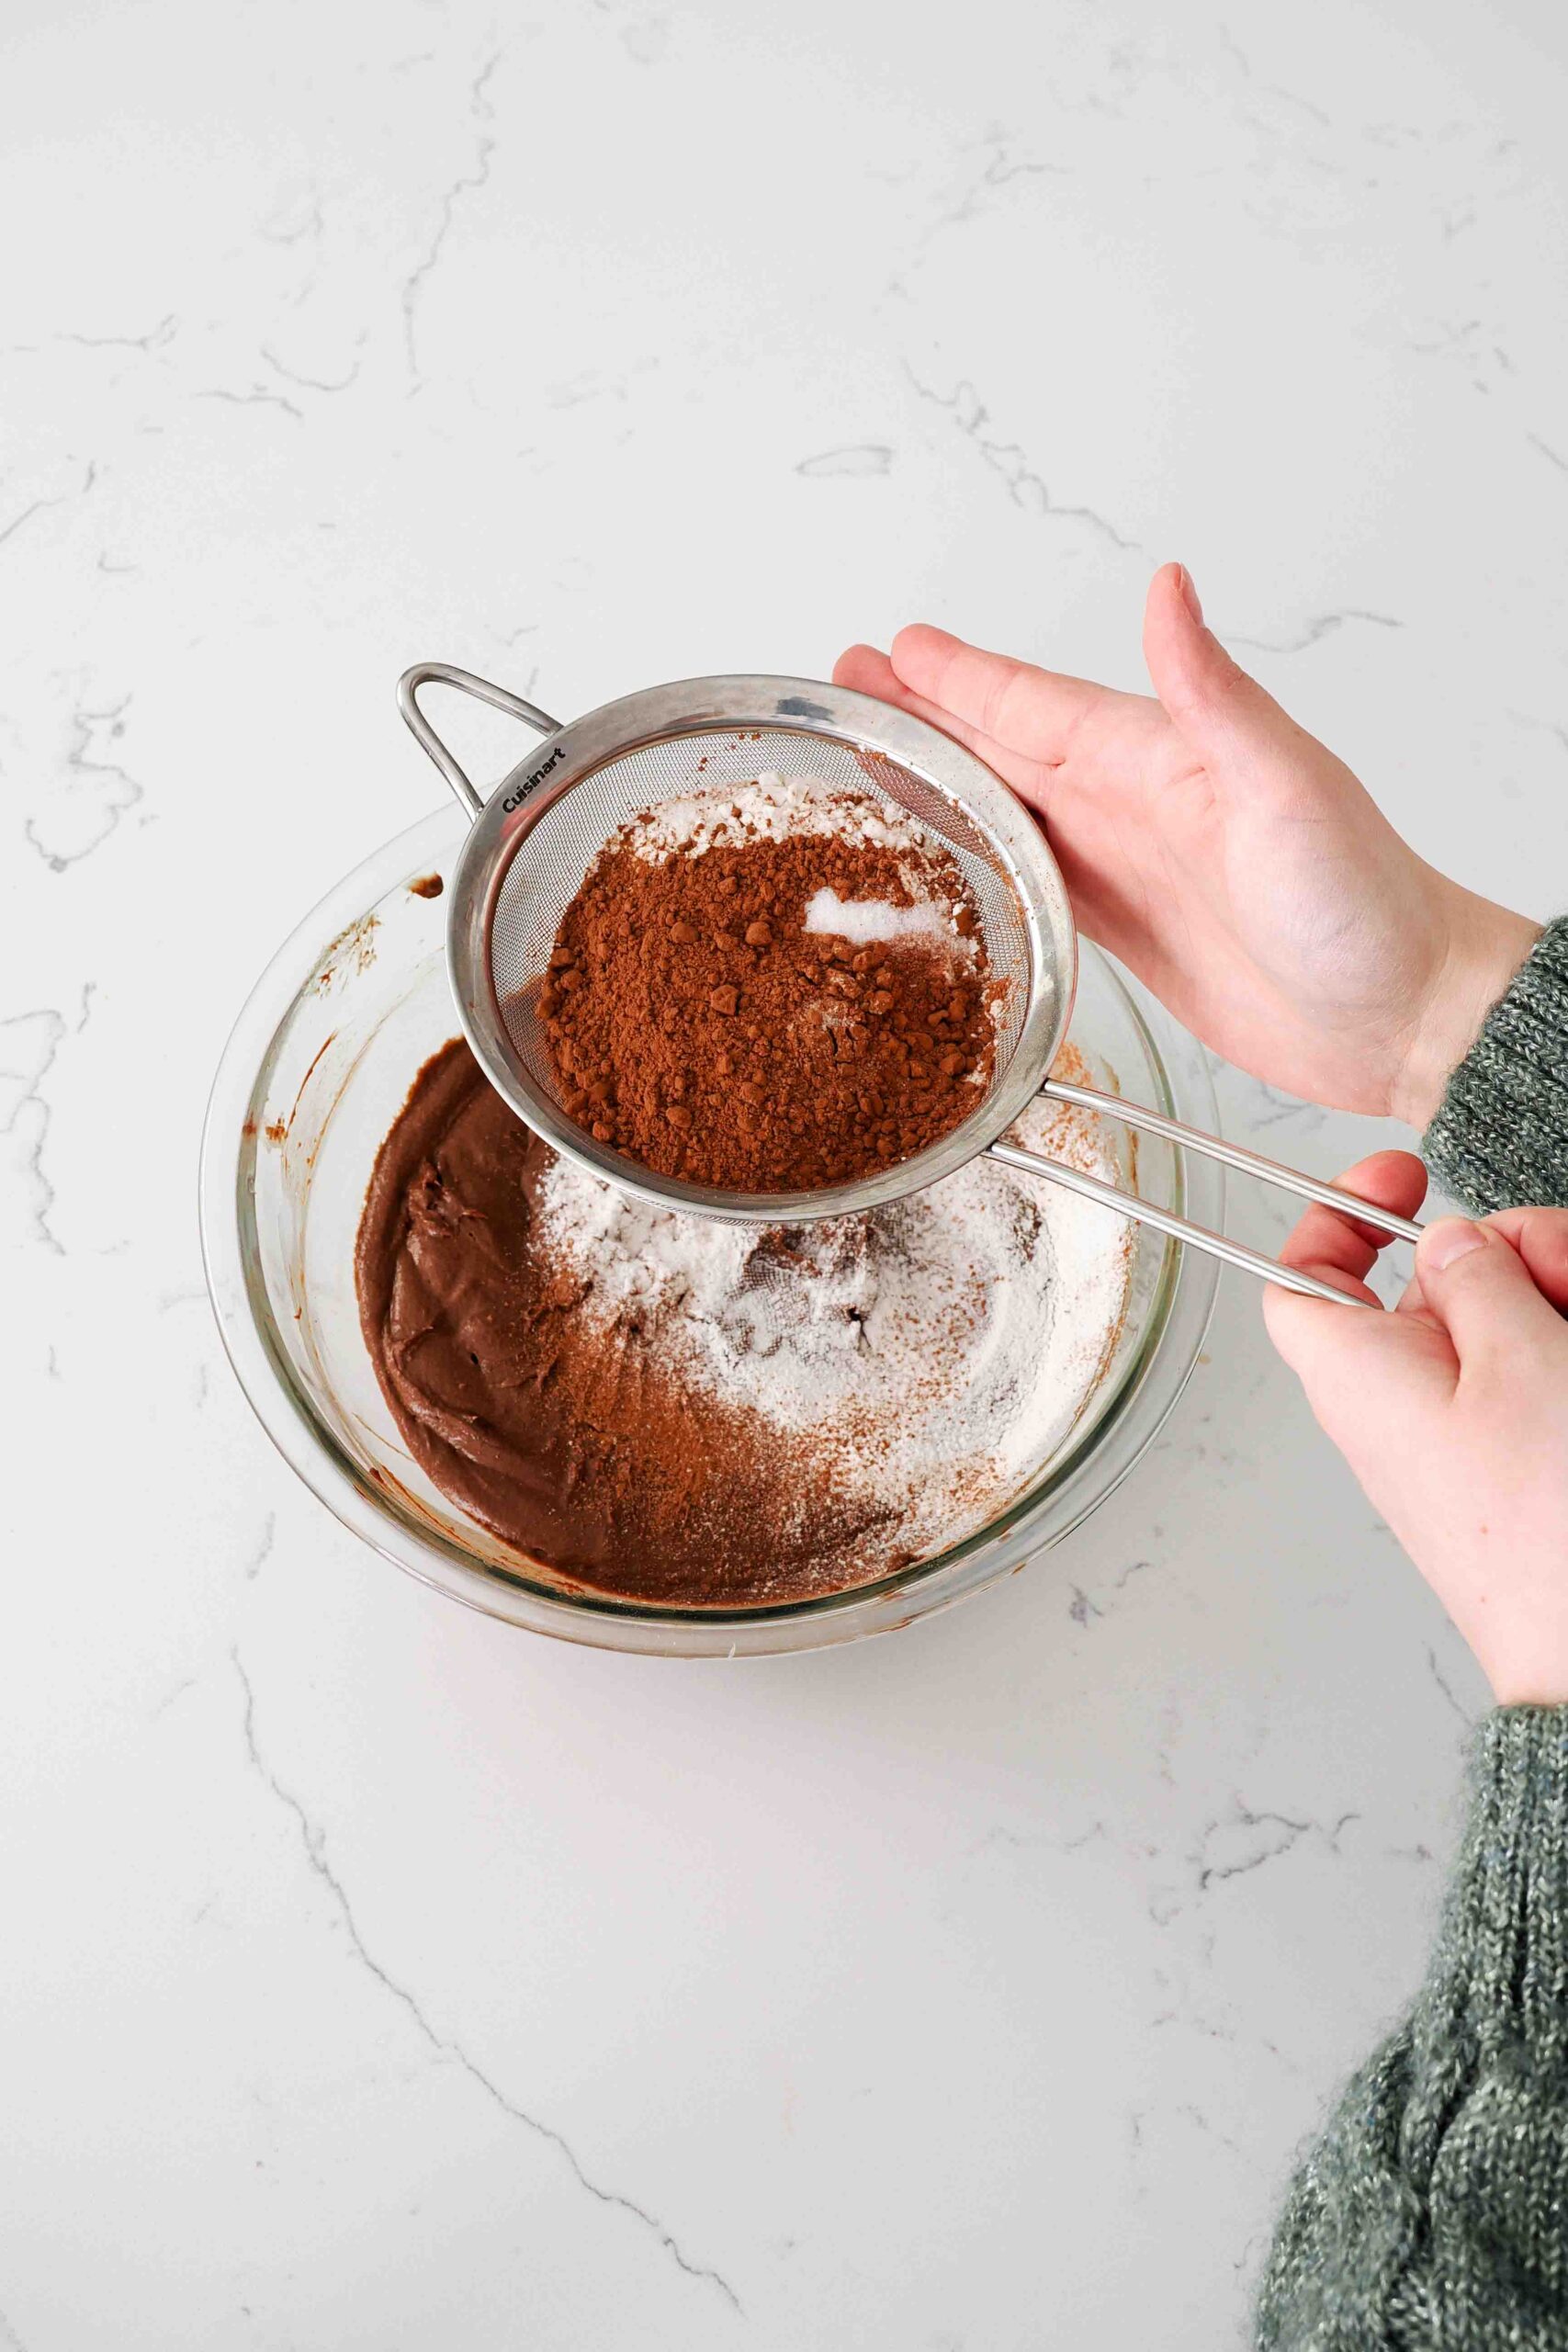 Two hands sift flour and cocoa powder into a glass bowl with brownie batter.